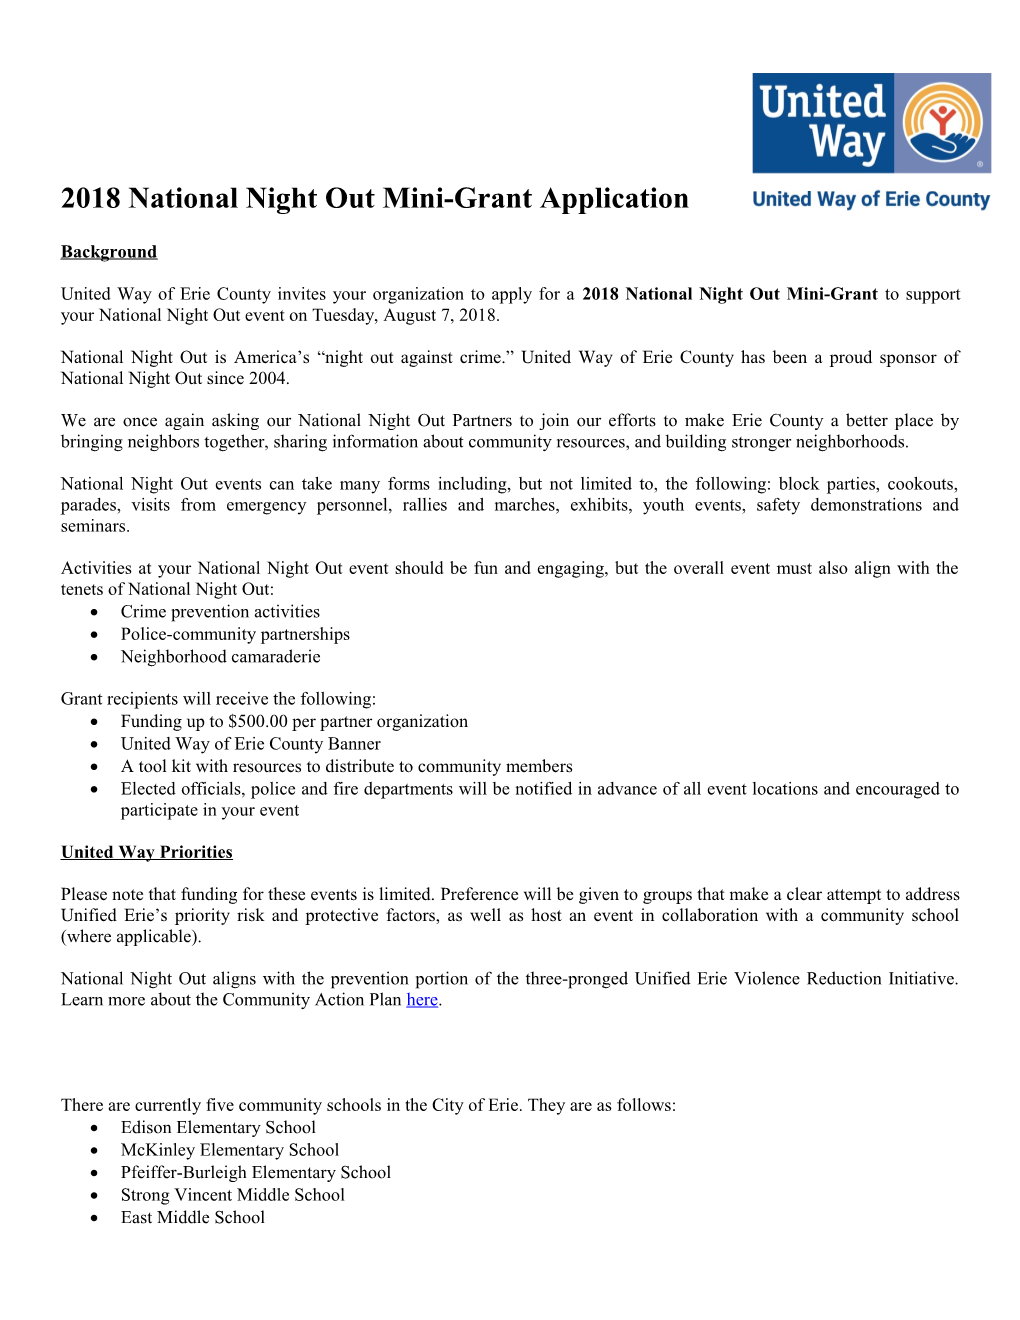 2018 National Night out Mini-Grant Application